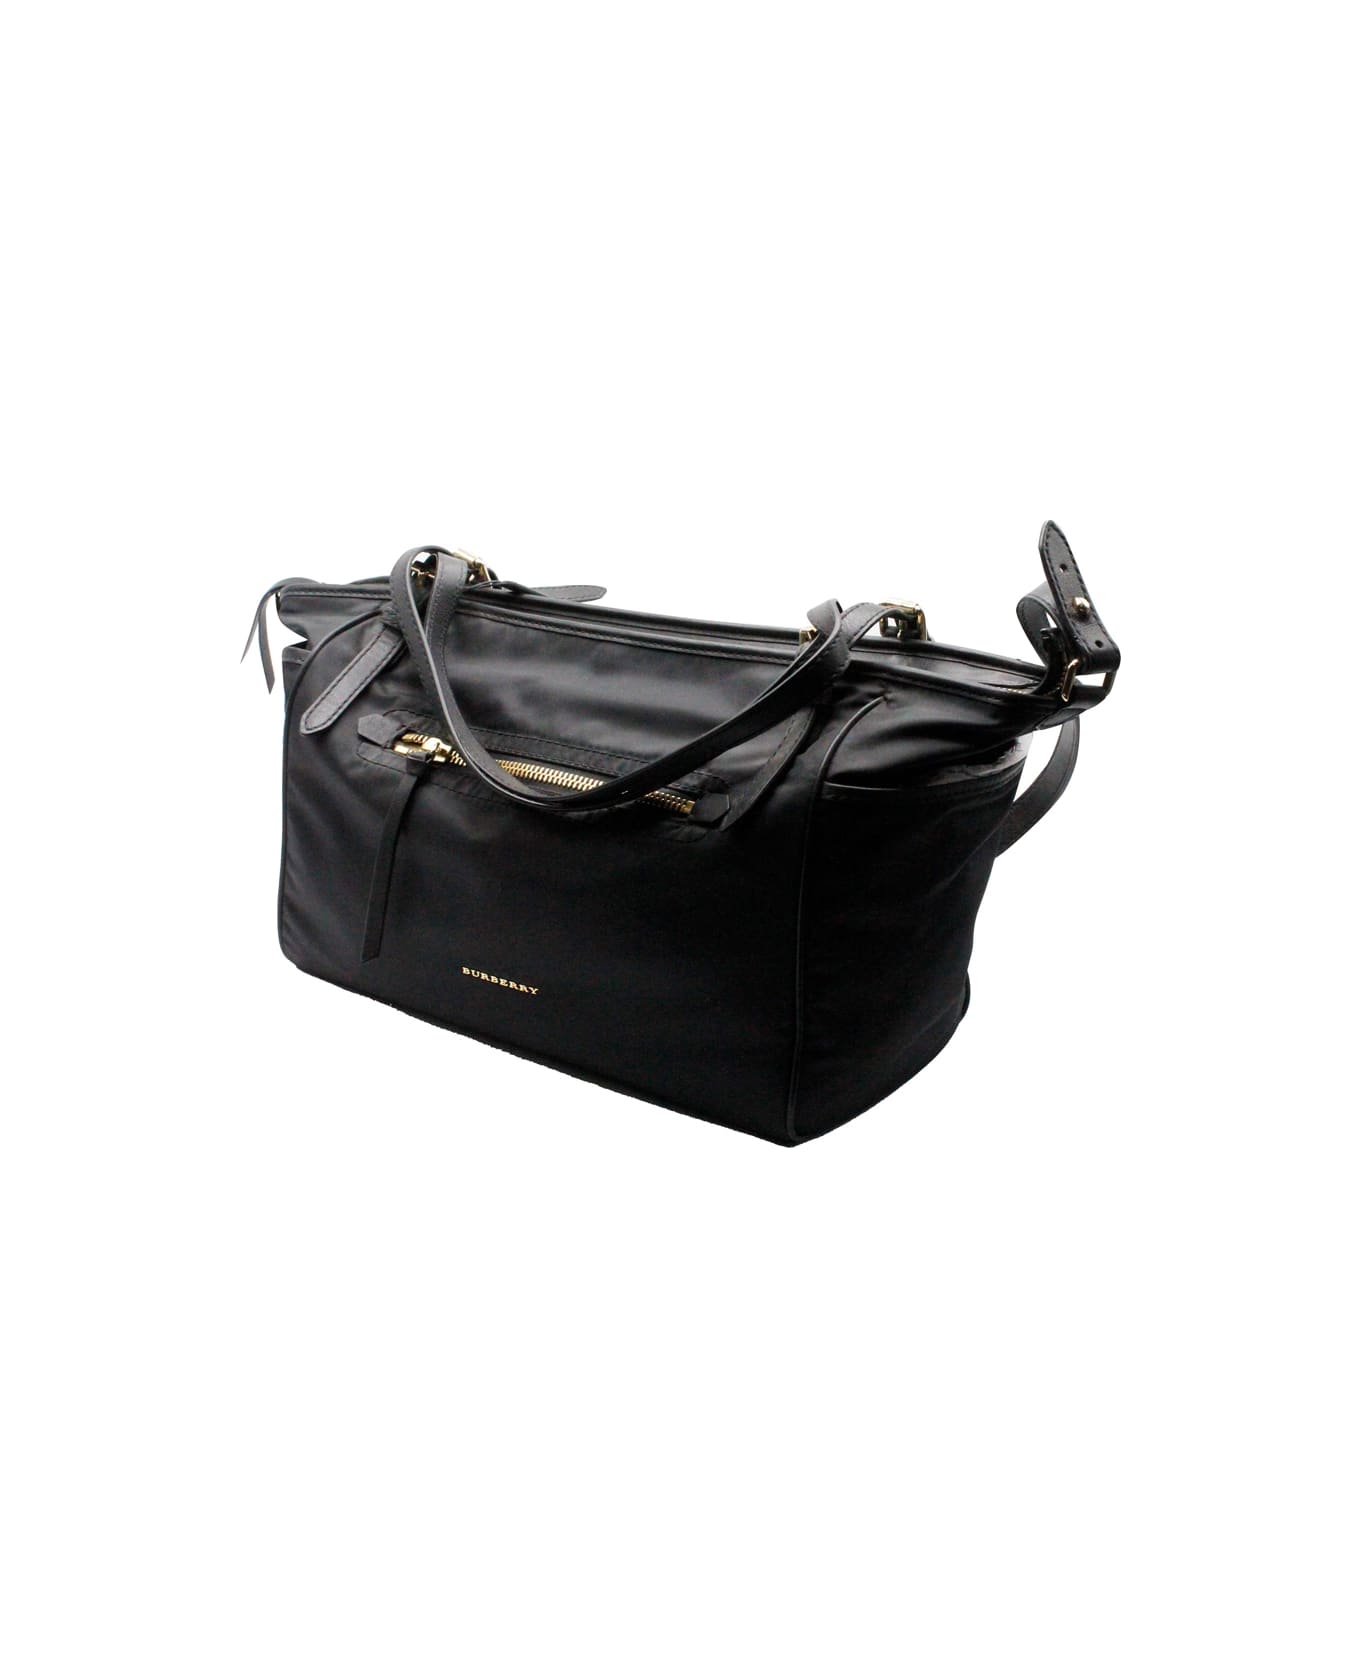 Burberry Mother's Changing Bag Made Of Technical Fabric With Leather Shoulder Strap, Comfortable Internal Pockets And Changing Mat. Measures Cm. 35x25x17 - Black